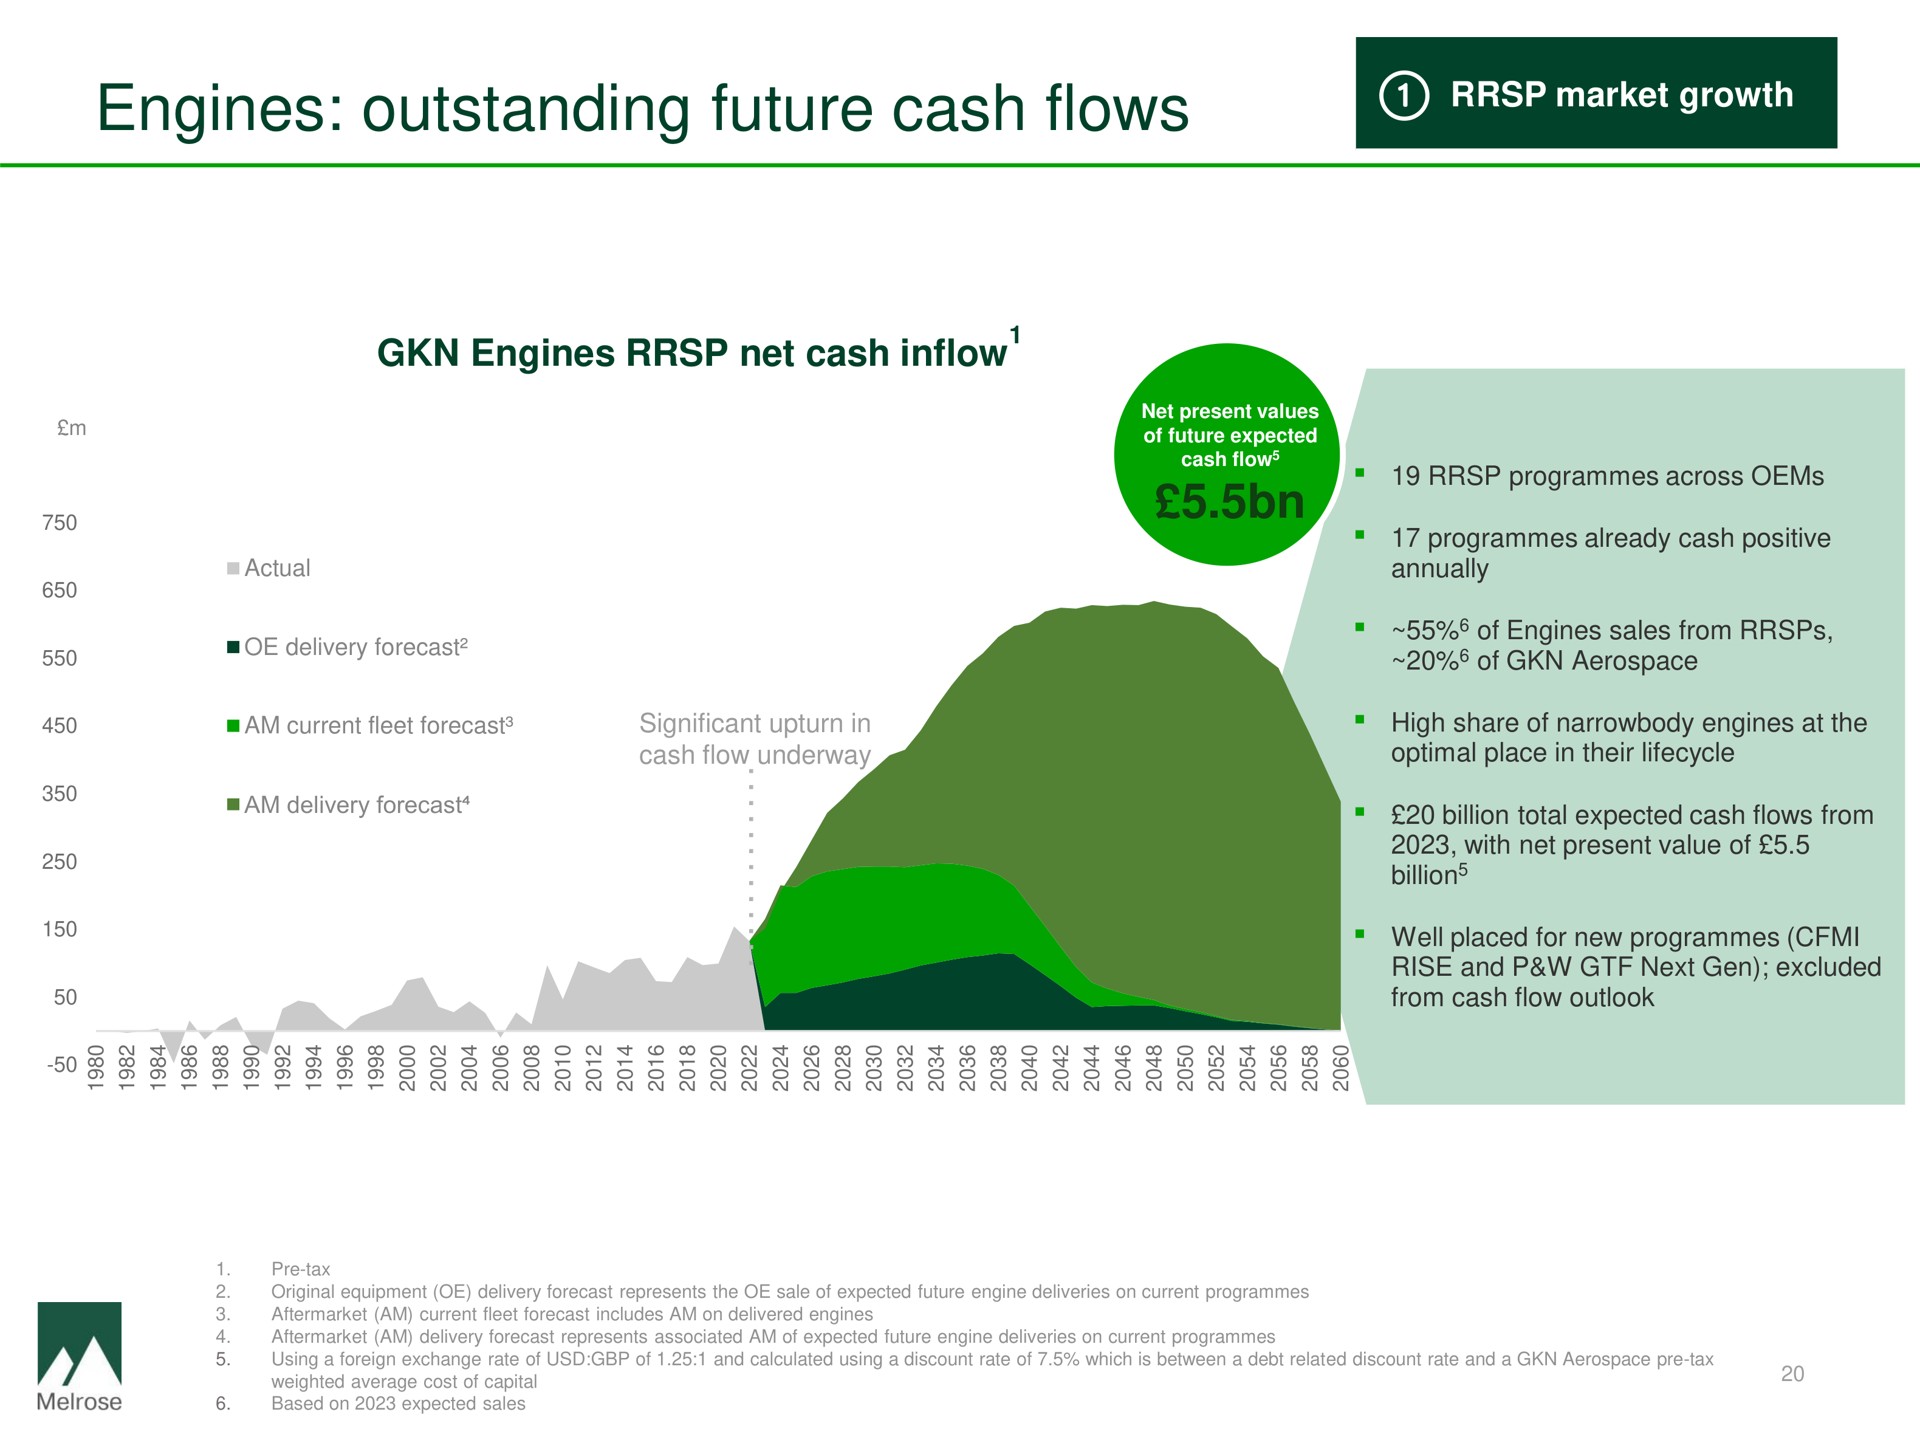 engines outstanding future cash flows net inflow | Melrose